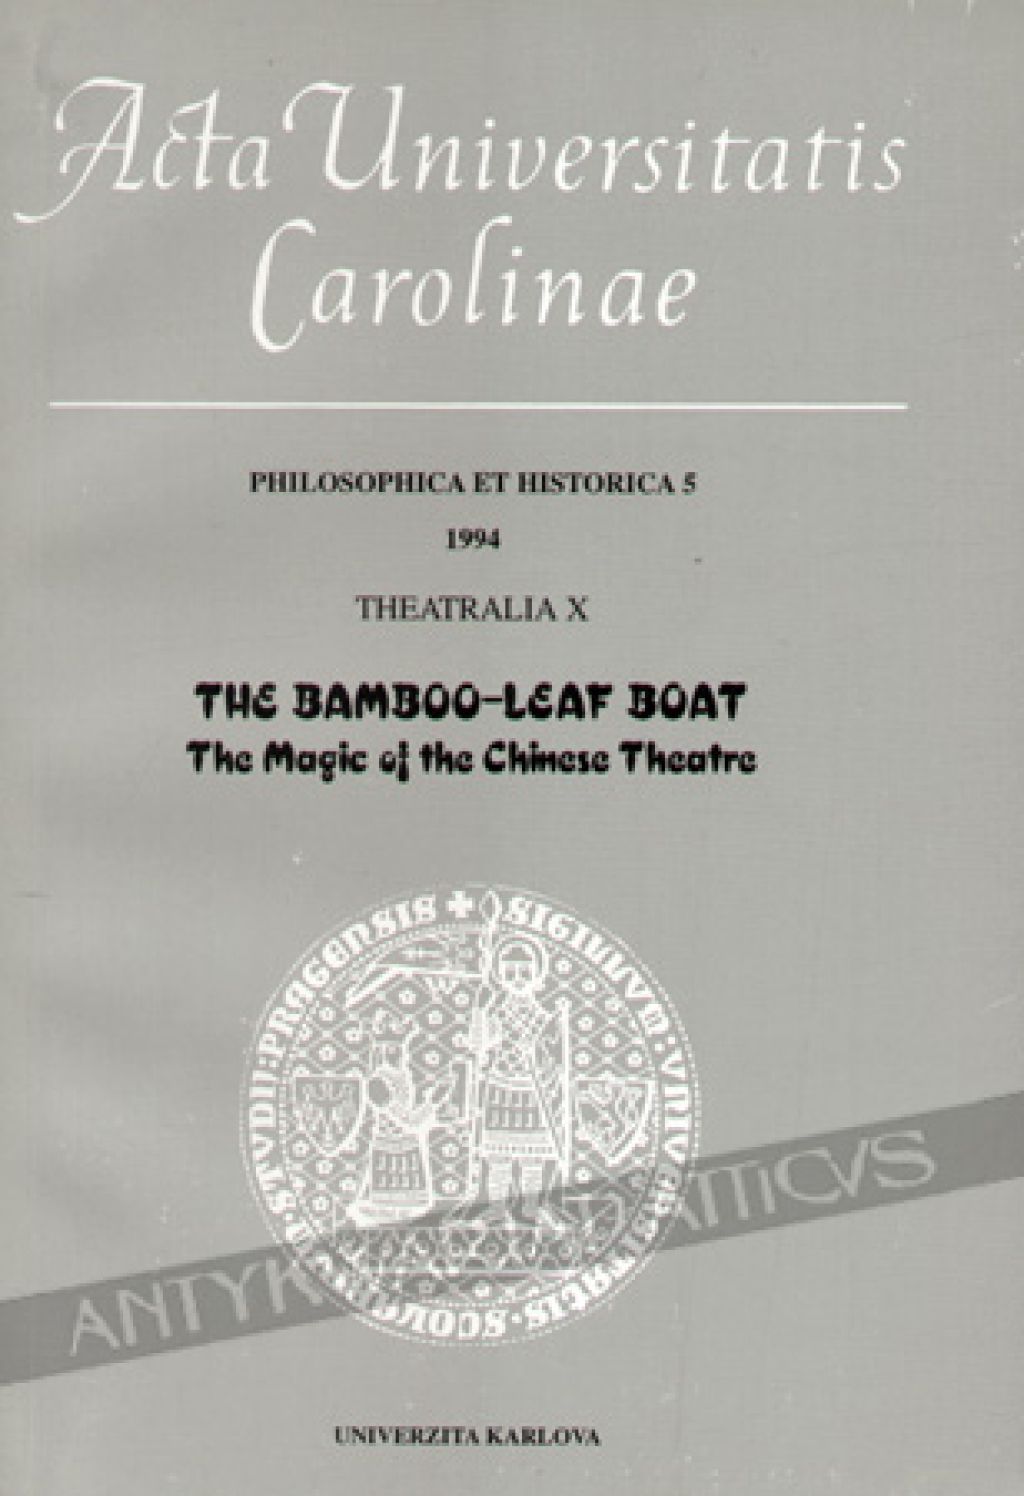 The Bamboo-Leaf Boat. The Magic of the Chinese Theatre